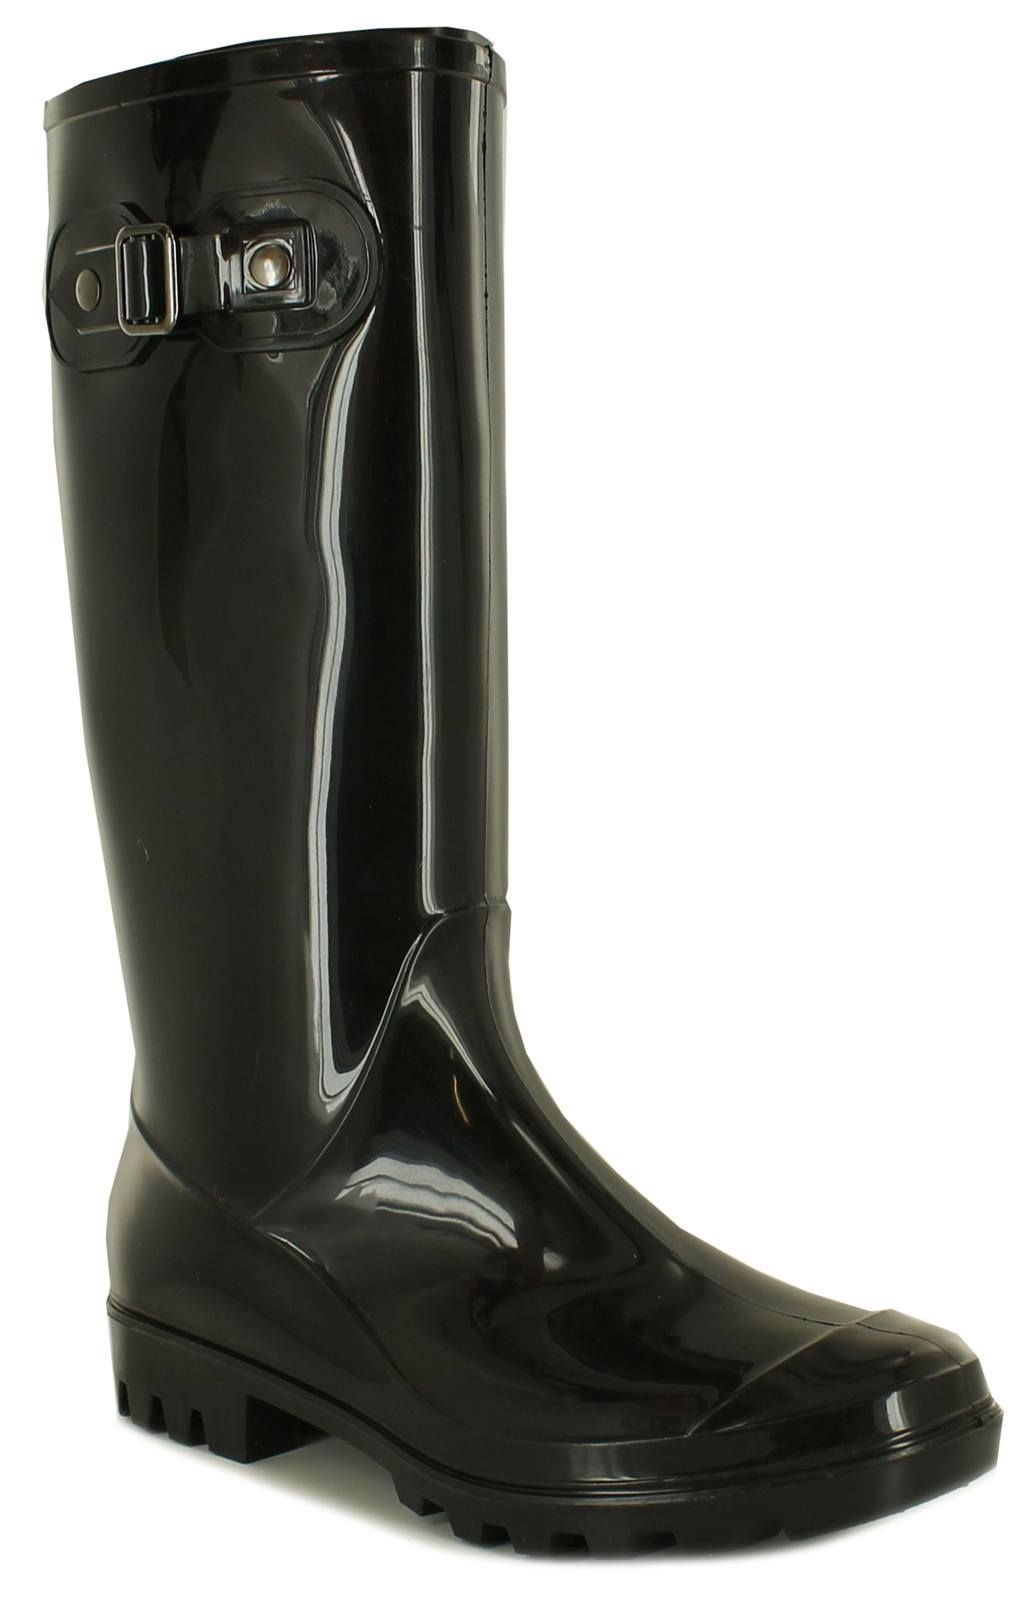 New Ladies/Womens Black Long Leg Wellington Boots With Cleat Sloe